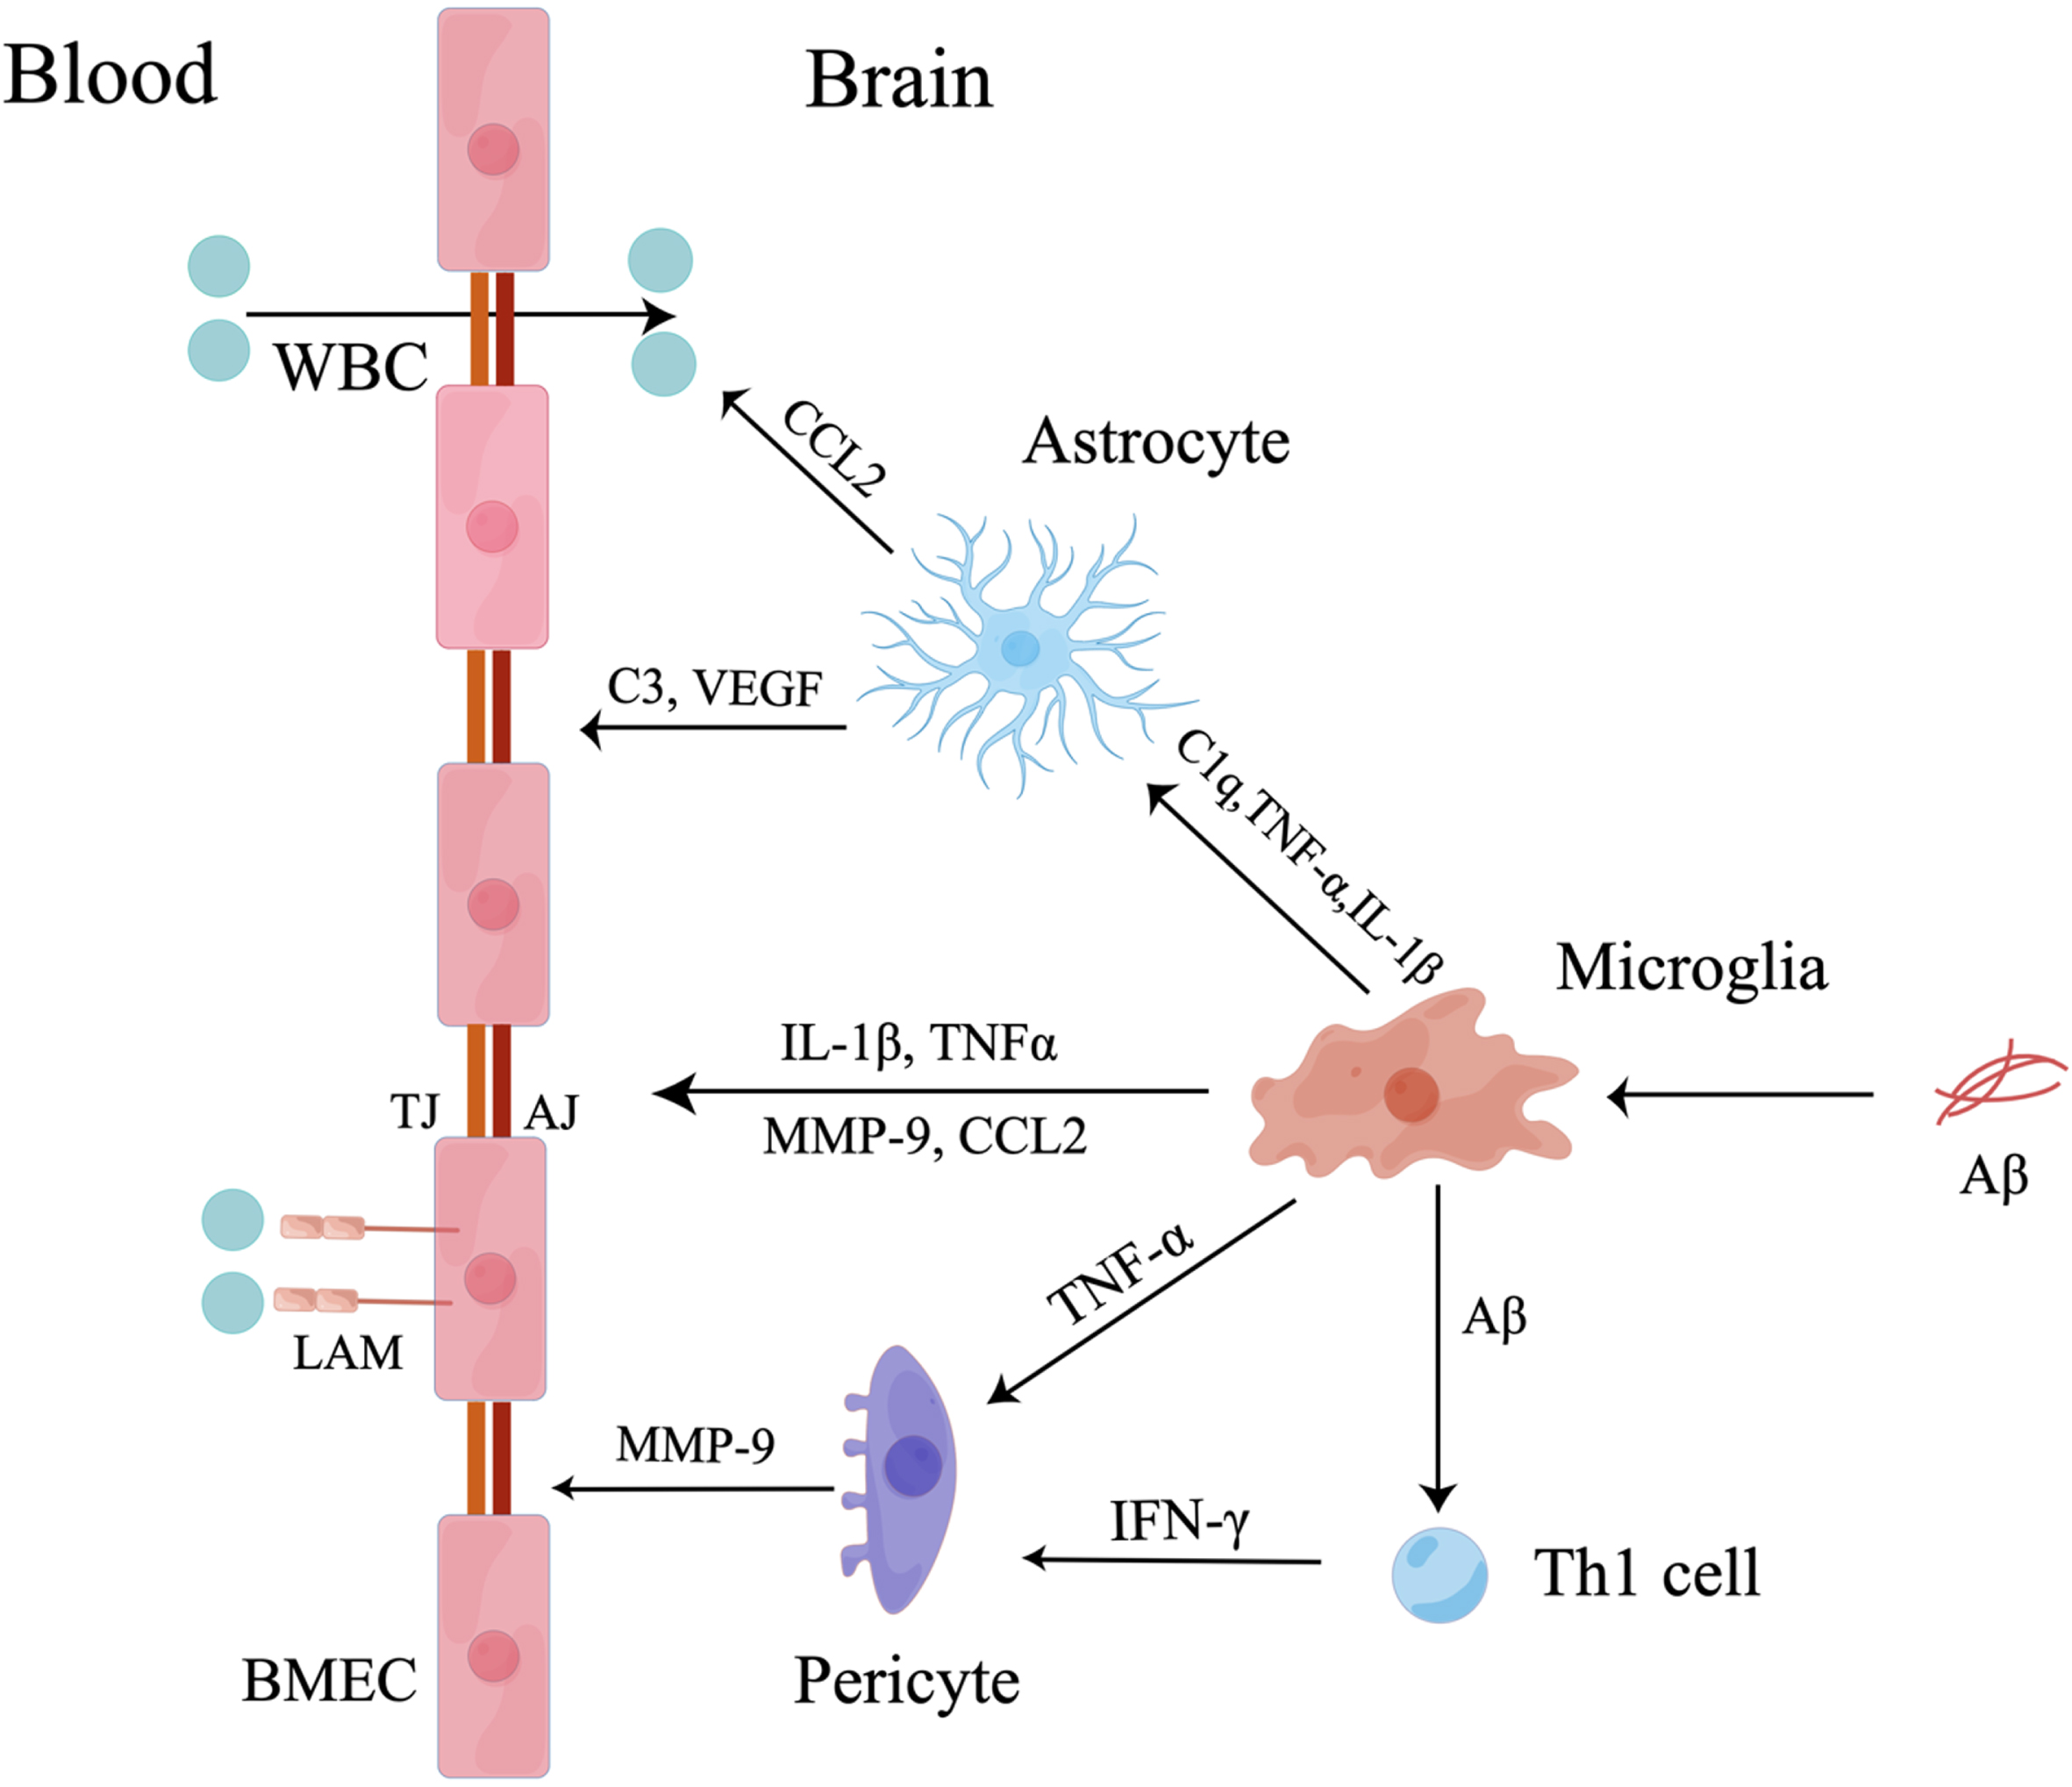 Microglia mediate BBB dysfunction. Firstly, microglia induced by Aβ secrete IL-1β, TNF-α, MMP-9, and CCL2 to destroy TJs and AJs between BMECs and increase the expression of leukocyte adhesion molecules (LAMs) on BMECs to attract peripheral WBCs. Secondly, activated microglia secrete C1q, TNF-α and IL-1β to activate astrocytes. The activated astrocytes promote transmigration of peripheral WBCs across BBB by secreting CCL2 and induce BBB breakdown by secreting C3 and vascular endothelial growth factors (VEGF). Thirdly, activated microglia mediate pericyte dysfunction by secreting TNF-α and presenting Aβ to Th1 cells. Then, activated pericytes increase the release of MMP-9 to destroy TJs leading to BBB impairment.